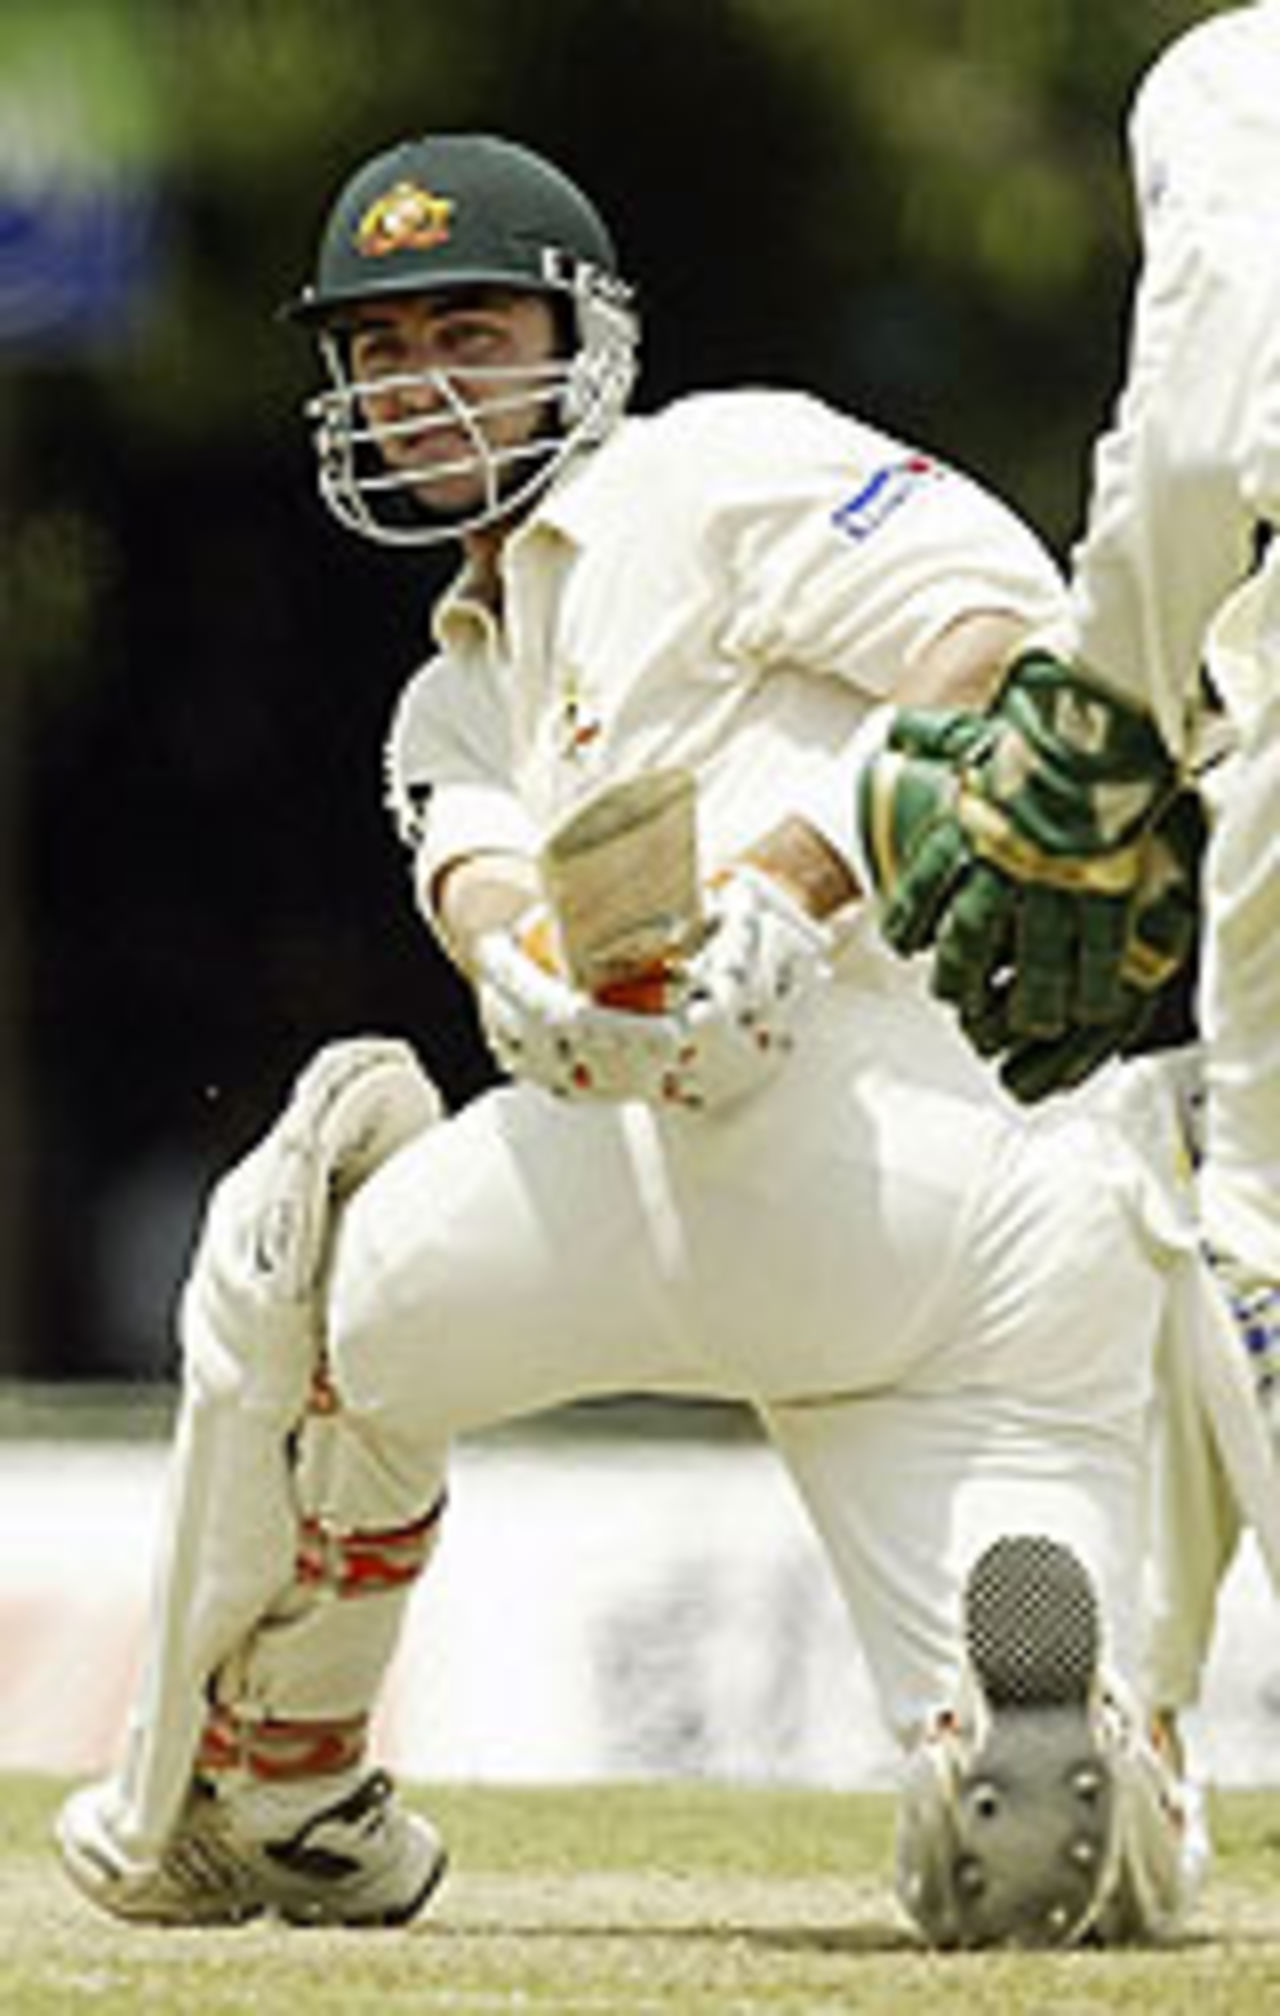 Damien Martyn sweeps during his innings at Kandy, Sri Lanka v Australia, 2nd Test, Kandy, 2nd day, March 17, 2004